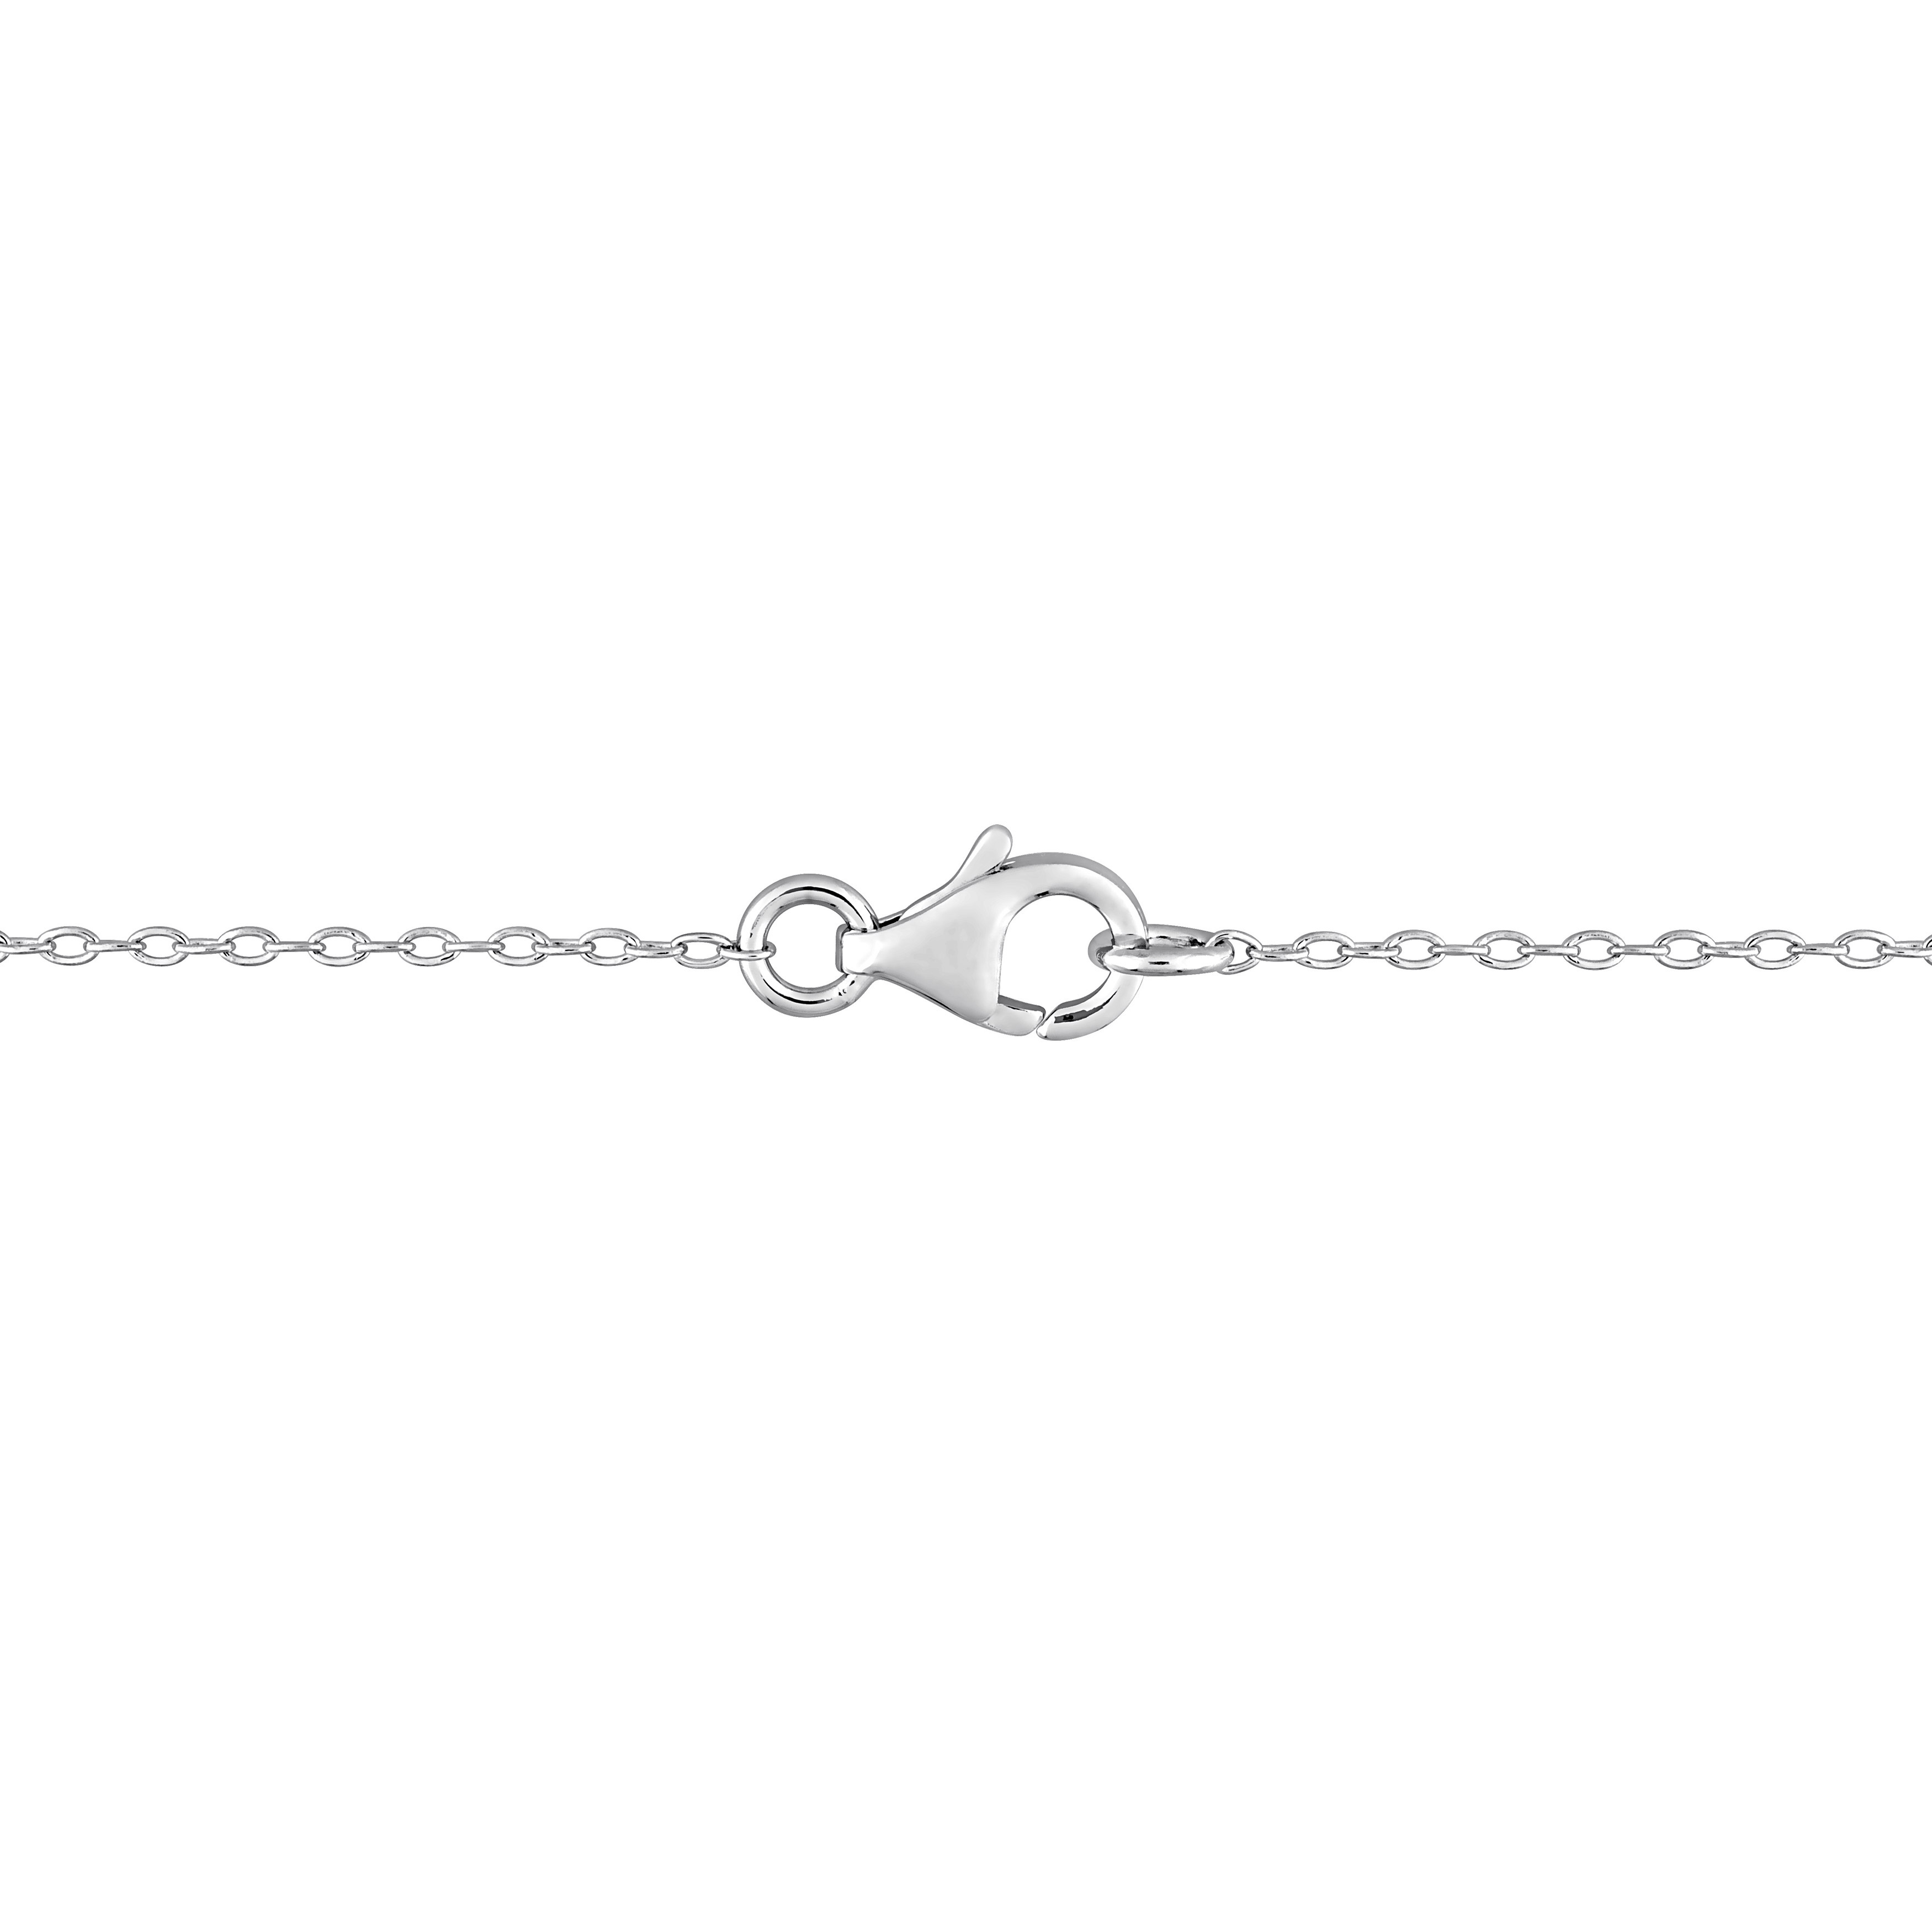 1 1/2 CT DEW Created Moissanite Halo Necklace in Sterling Silver - 18 in.